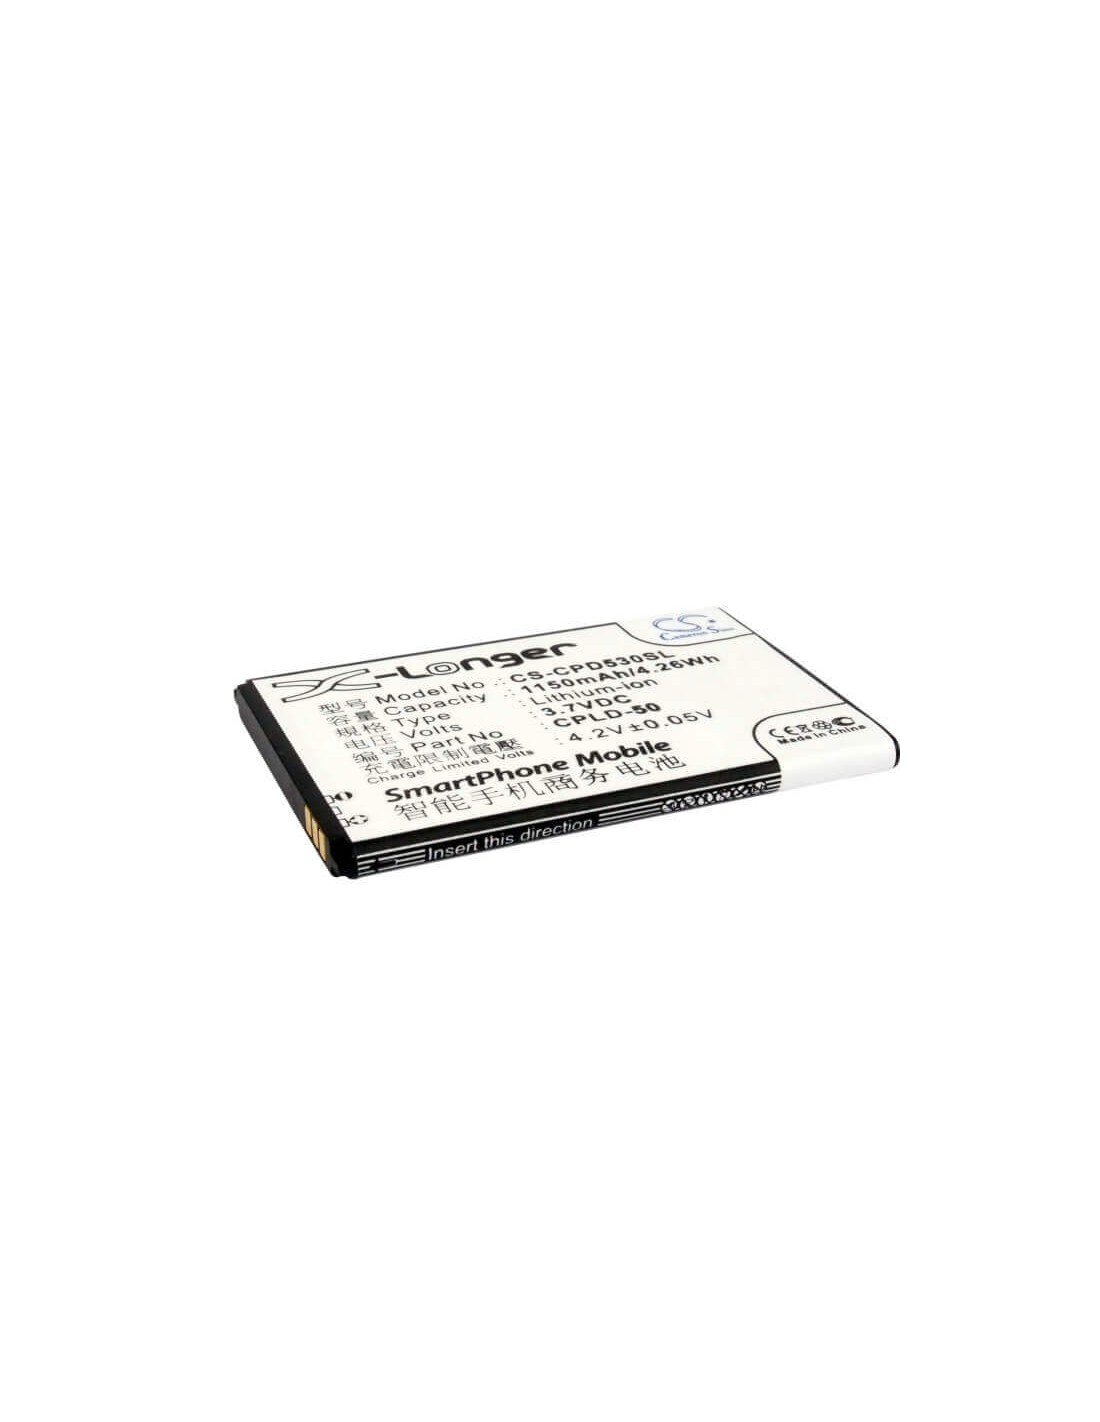 Battery for Coolpad D530, E239, W711 3.7V, 1150mAh - 4.26Wh